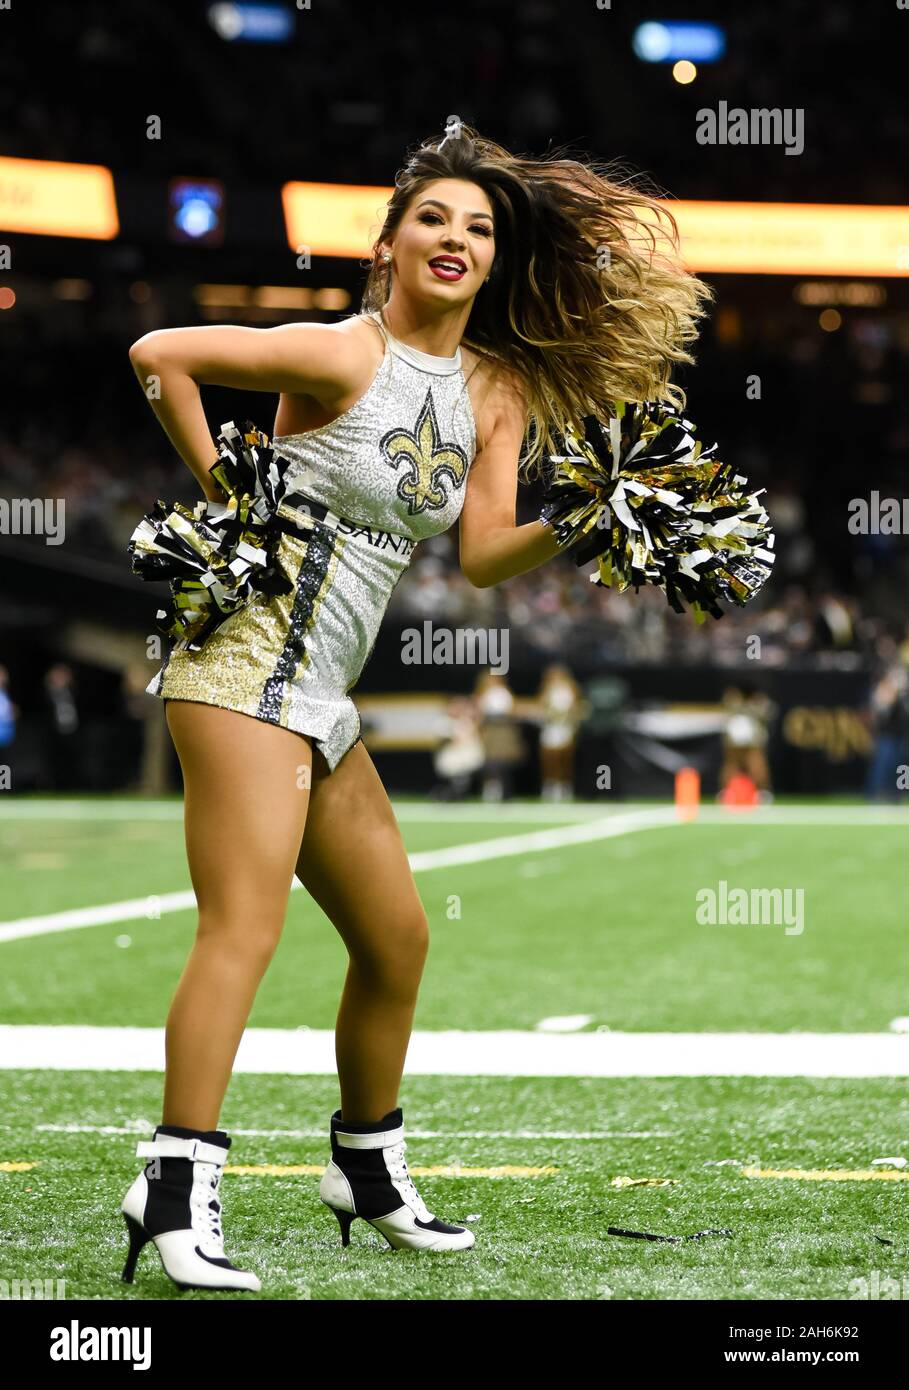 New Orleans, LA, USA. 16th Dec, 2019. New Orleans Saints cheerleaders perform during the 2nd half of the NFL game between the New Orleans Saints and the New Orleans Saints at the Mercedes Benz Superdome in New Orleans, LA. Matthew Lynch/CSM/Alamy Live News Stock Photo